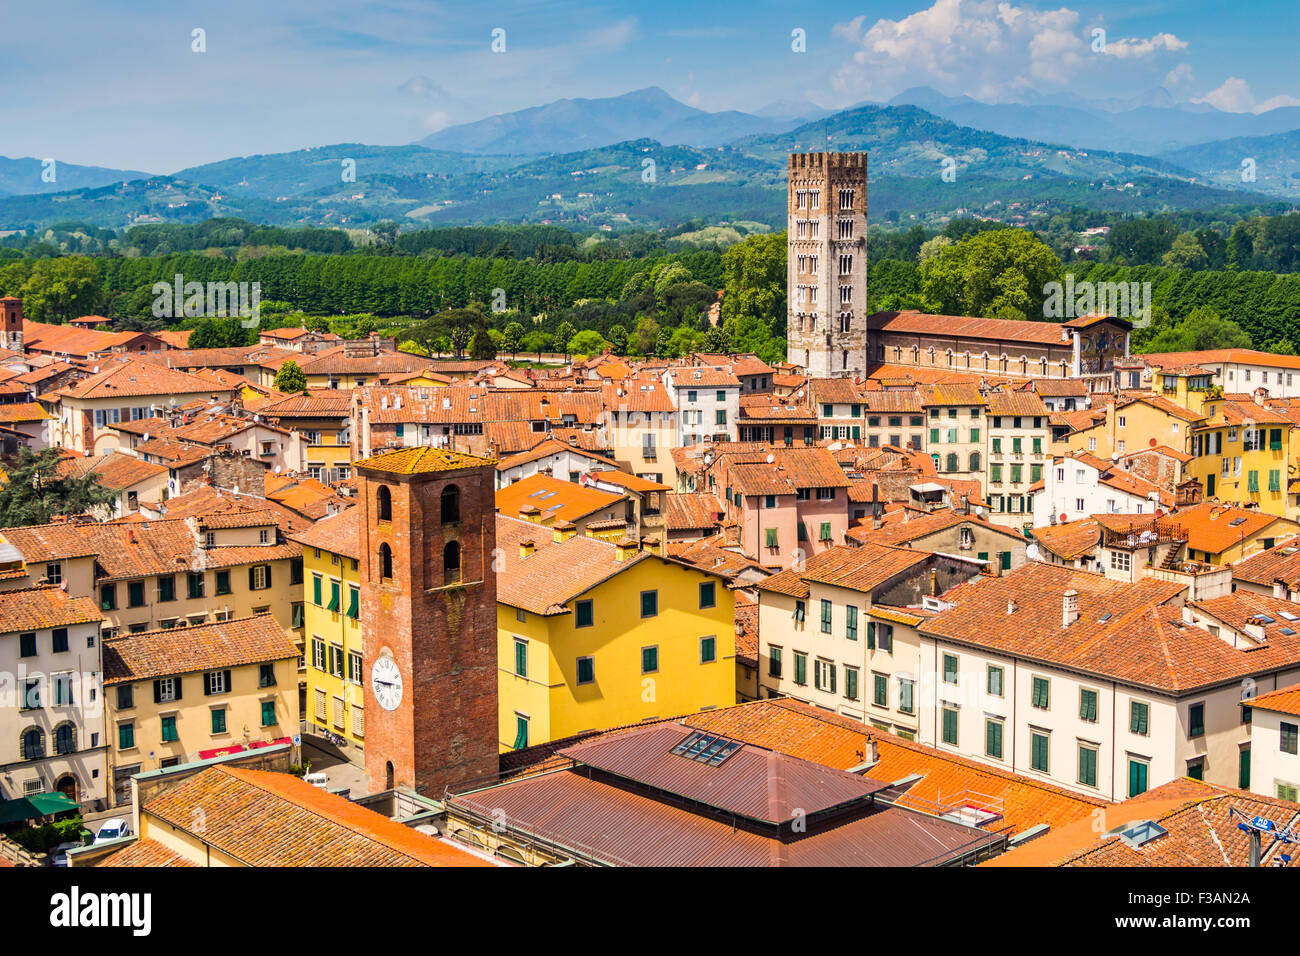 View over Italian town Lucca with typical terracotta roofs Stock Photo